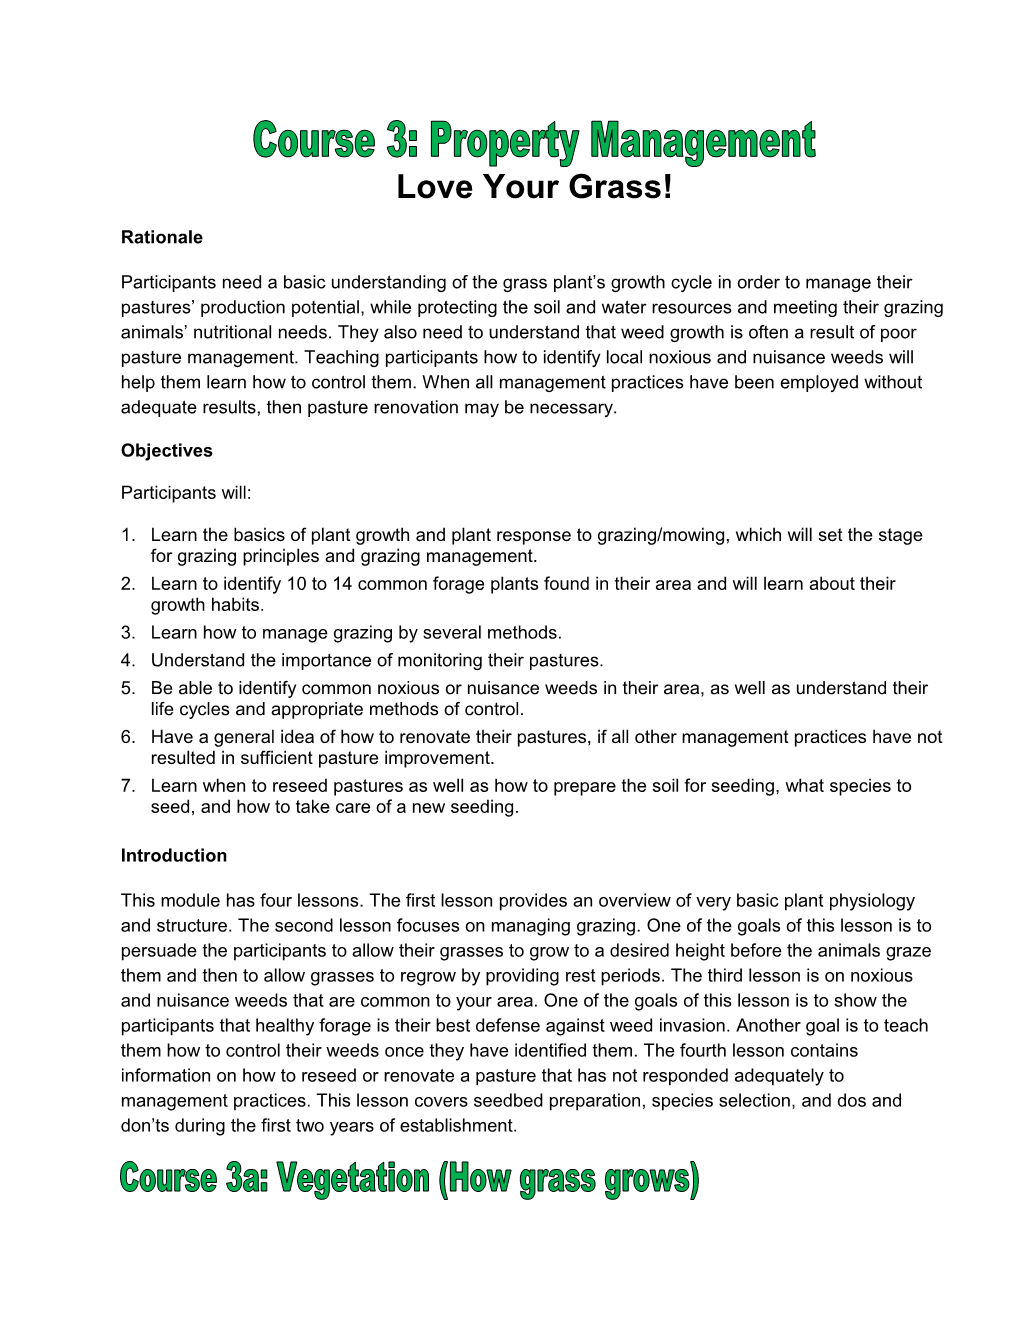 Module 5 - Love Your Grass As Much As Your Animals